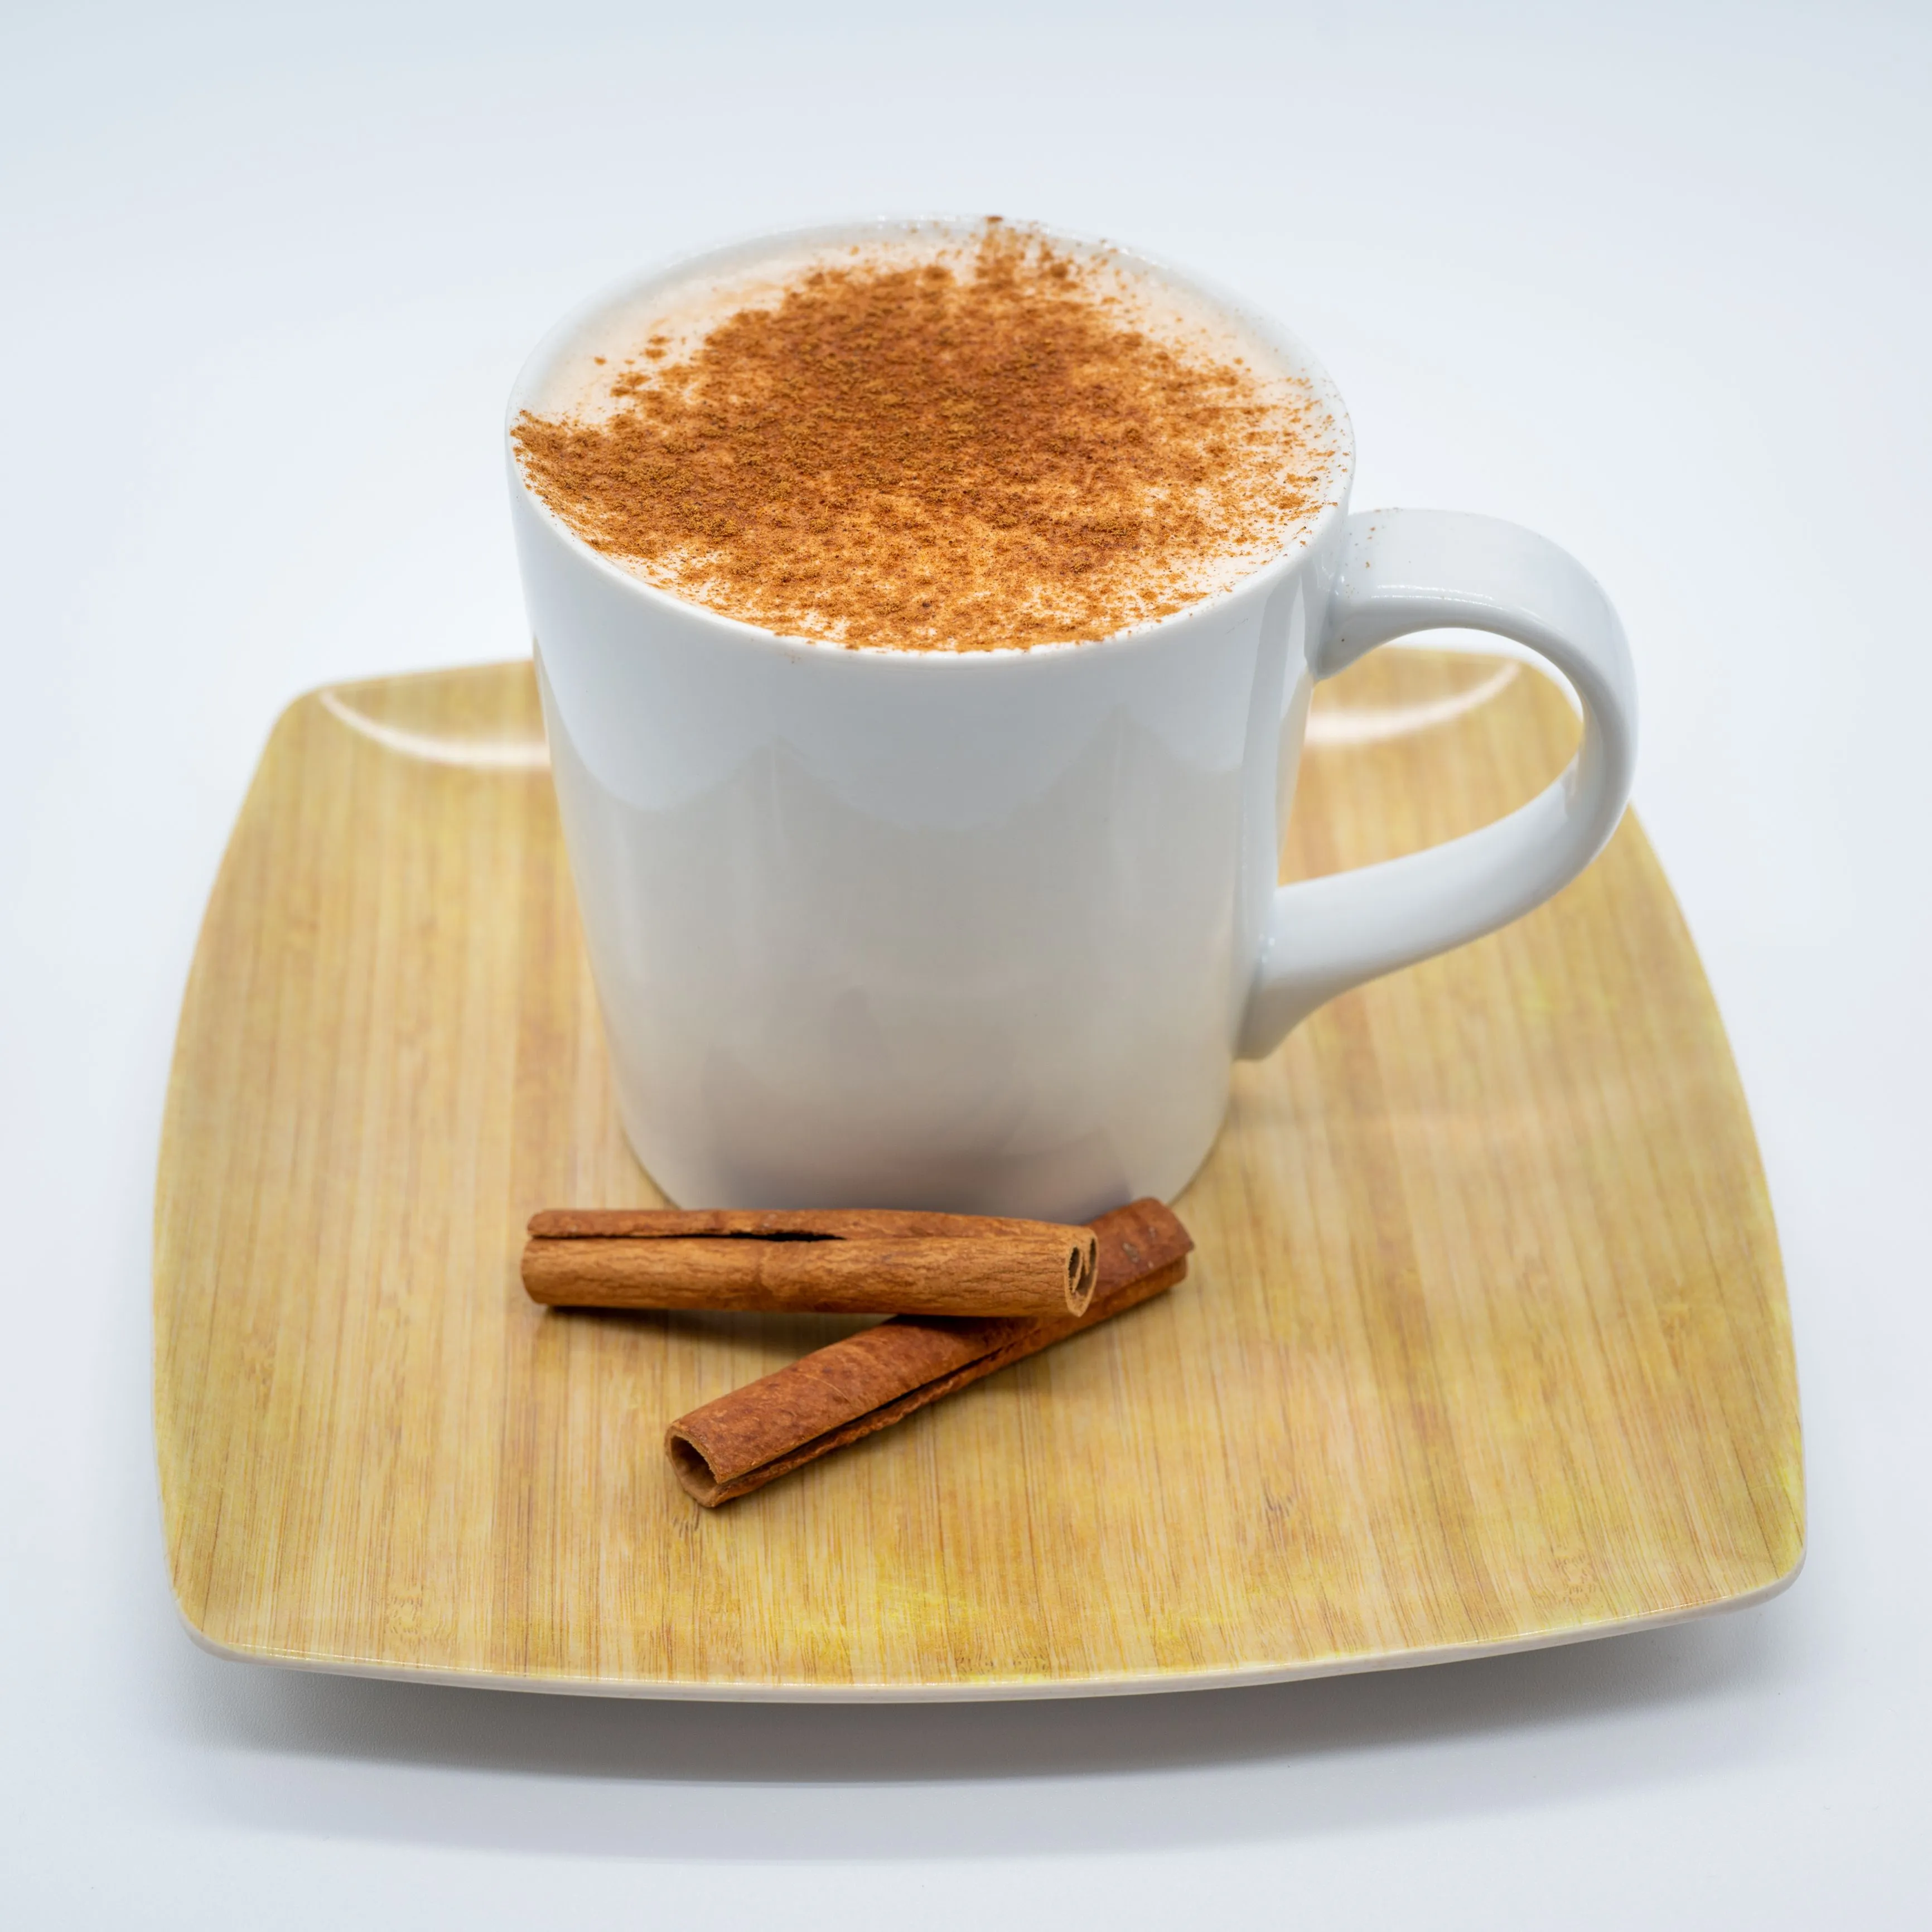 A cup of cappuccino with cinnamon sprinkled on top, resting on a wooden tray beside two cinnamon sticks.